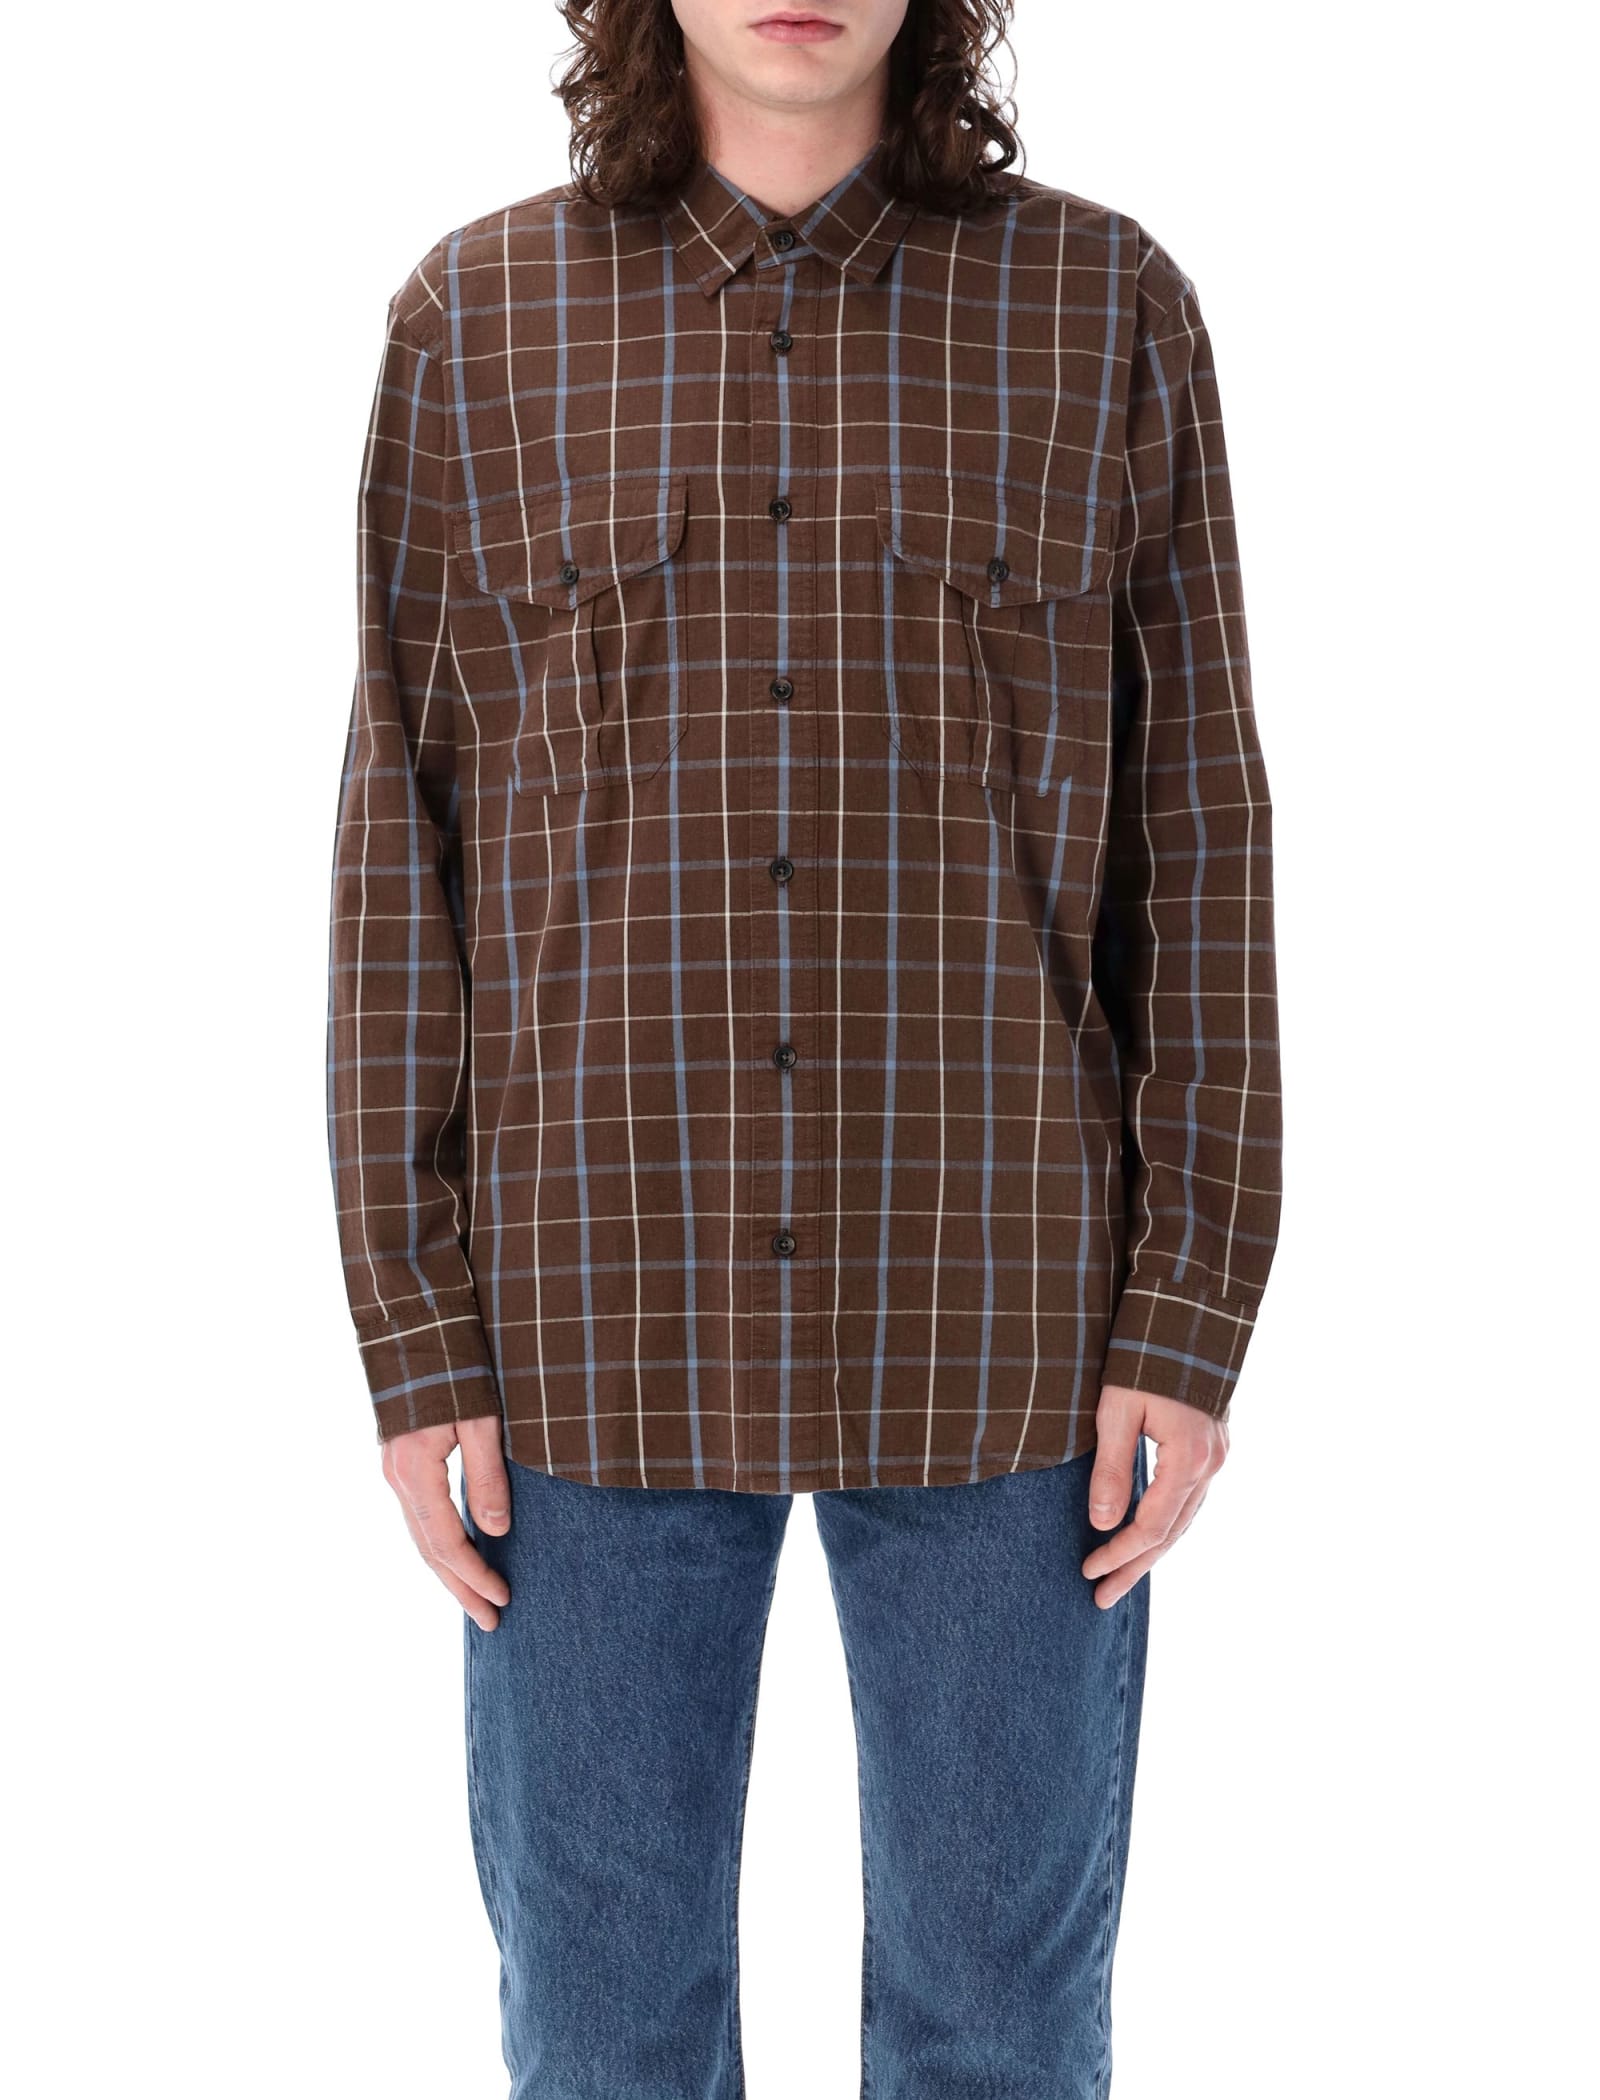 FILSON WASHED FEATHER CLOTH SHIRT